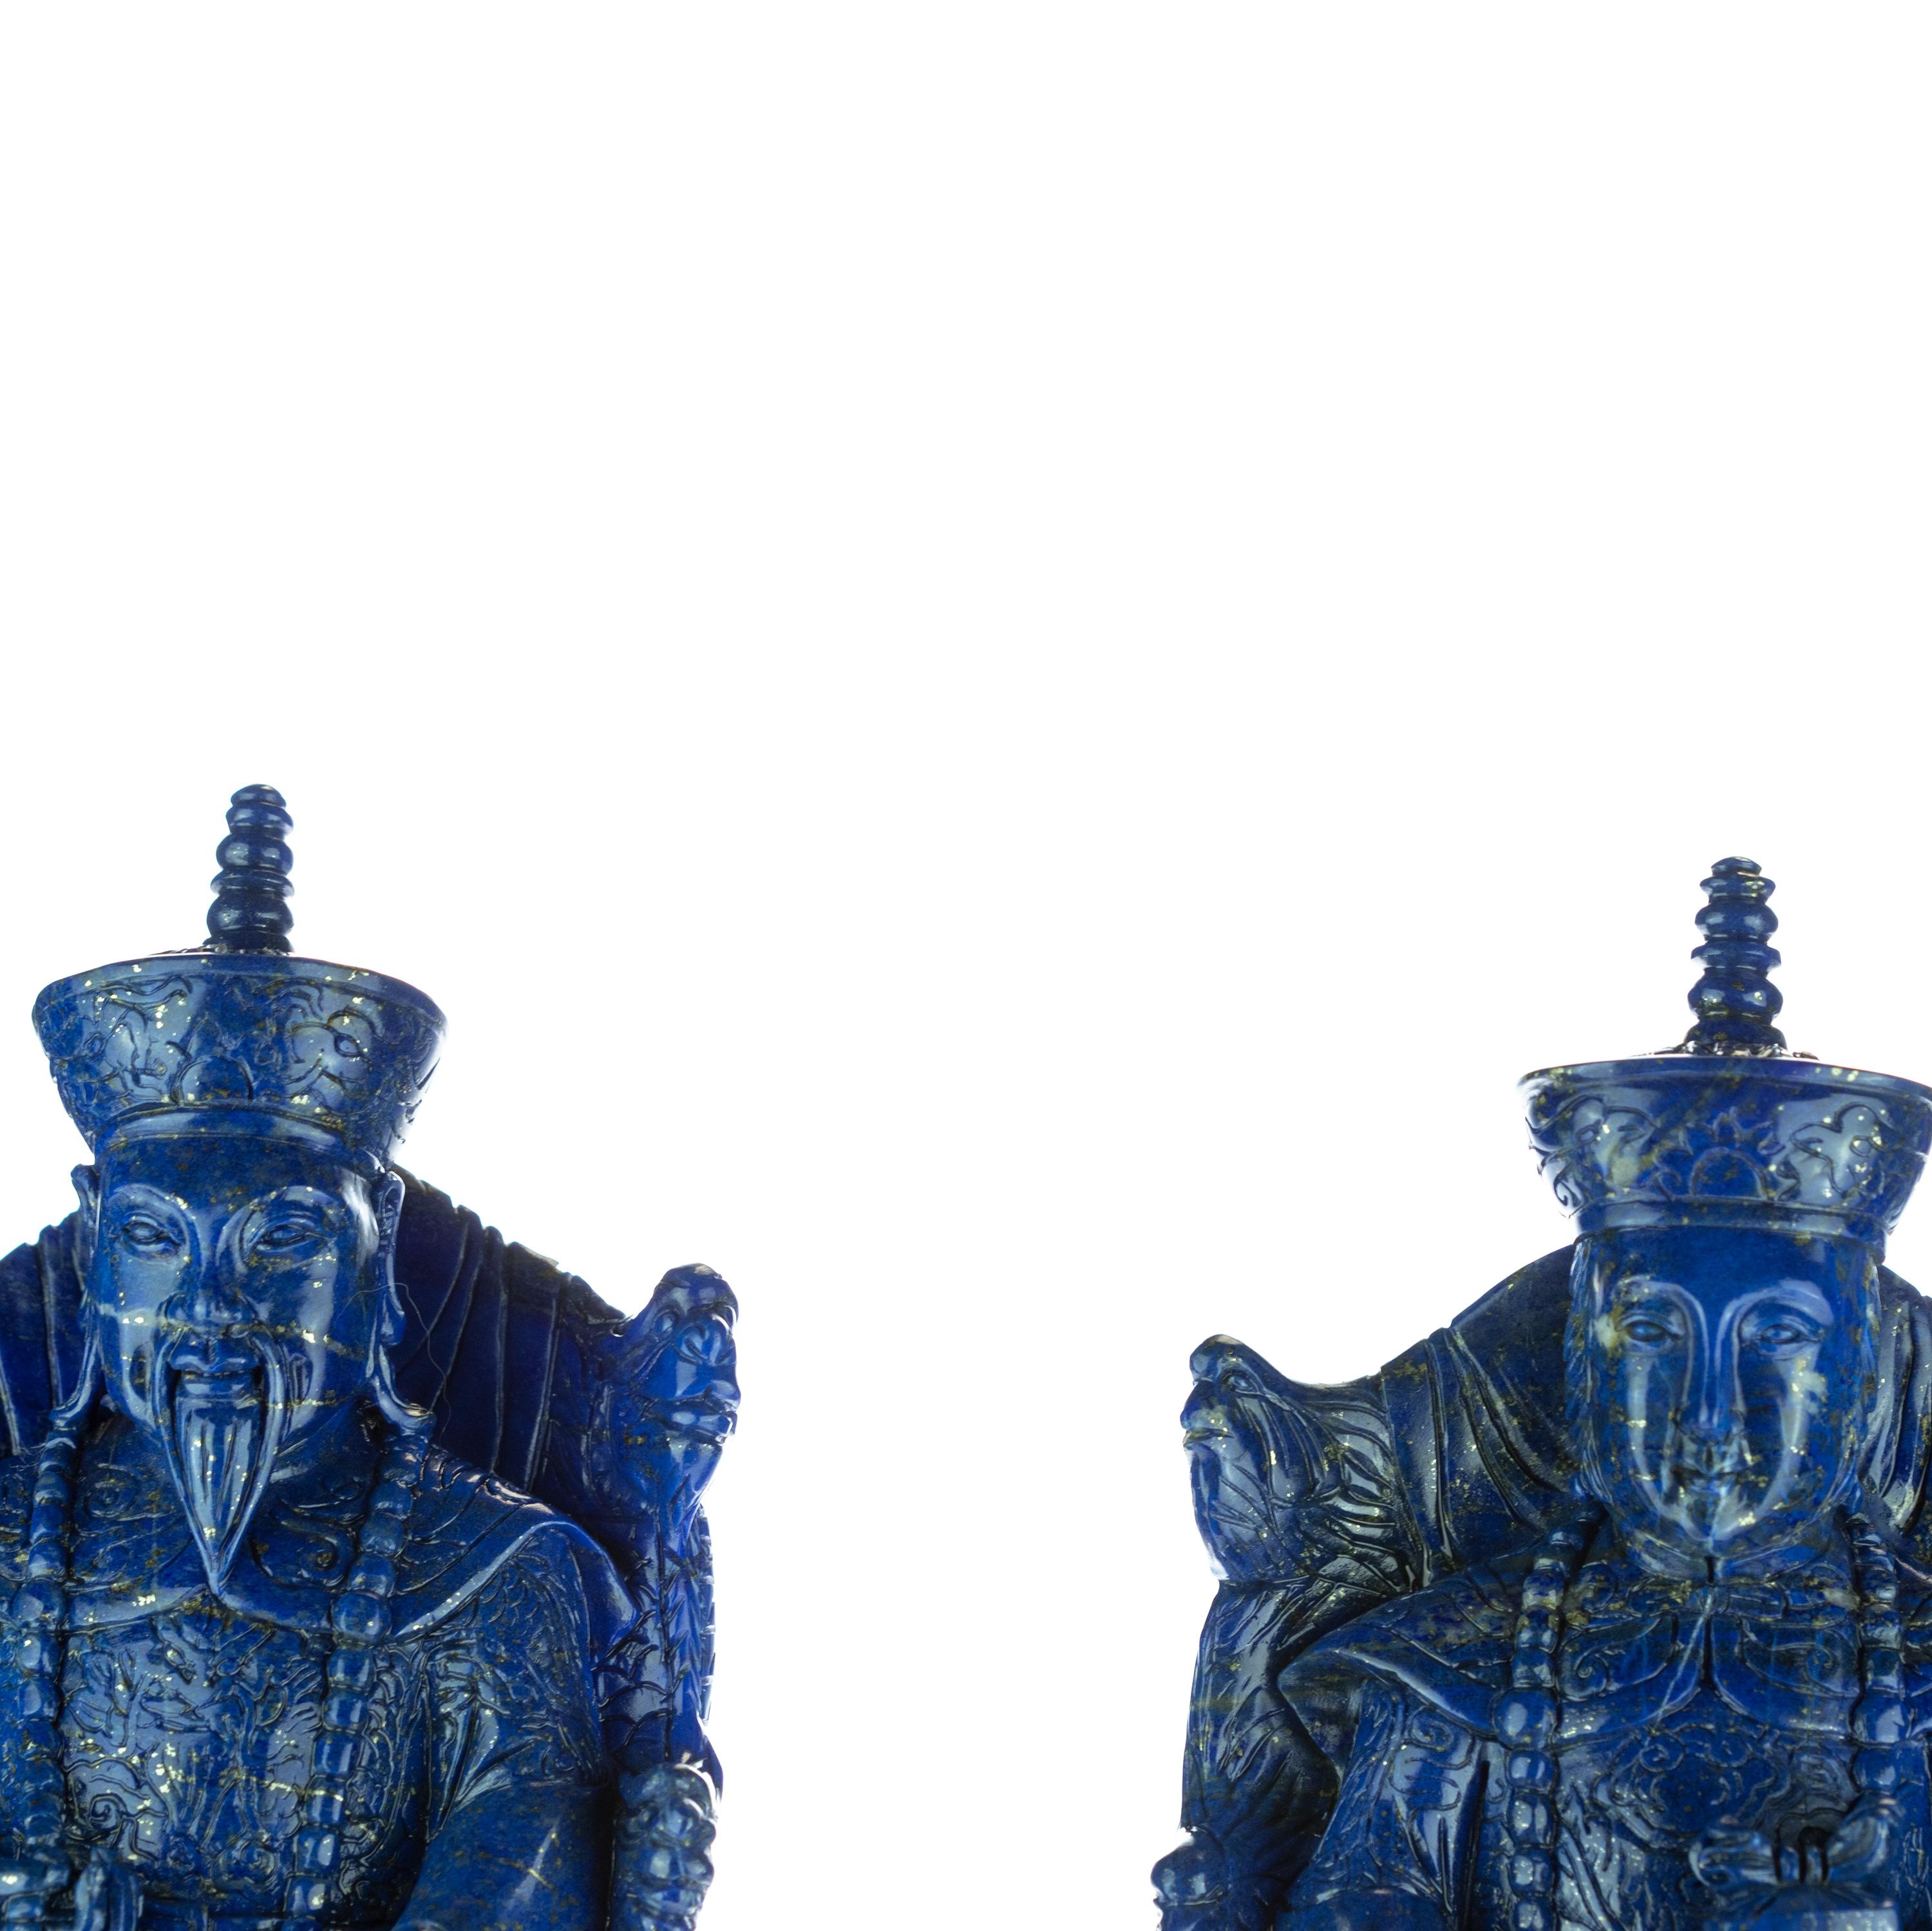 Lapis Lazuli King Queen Carved Blue Gemstone Artisanal Royalty Statue Sculpture For Sale 2